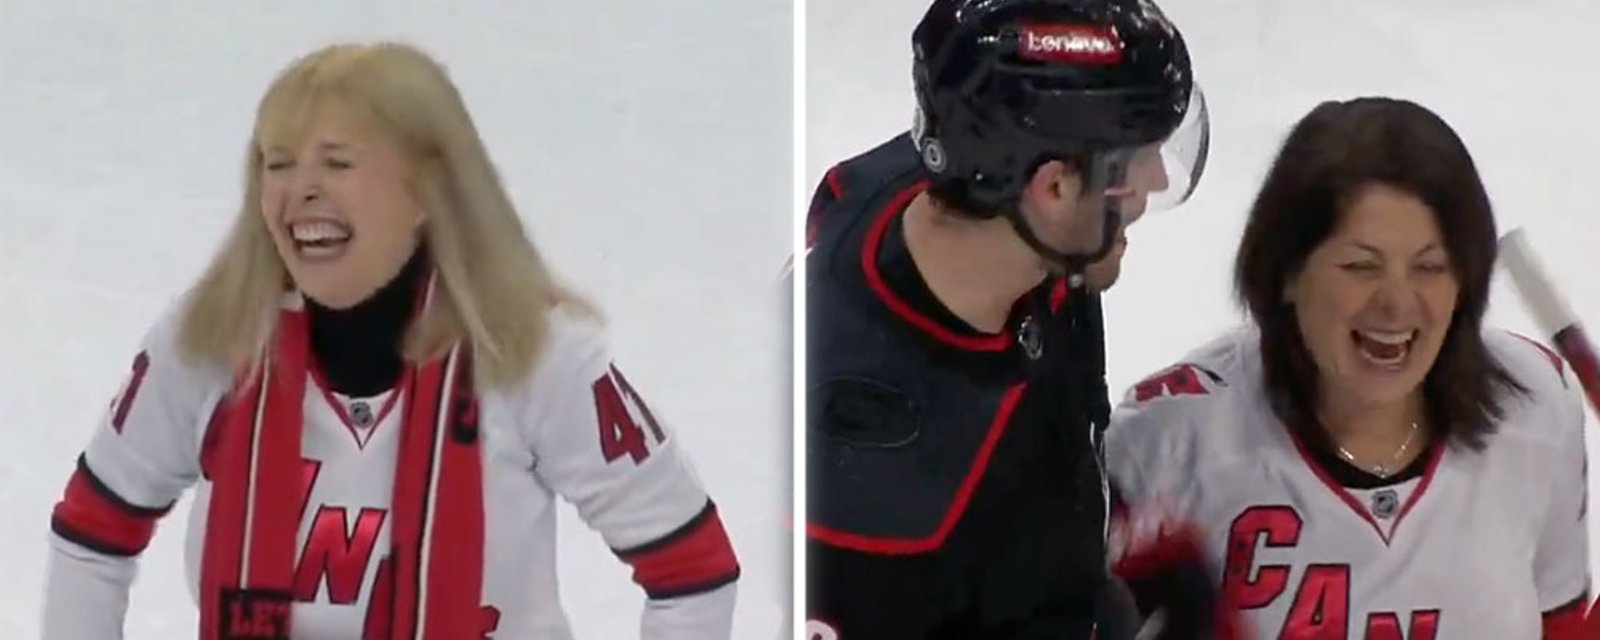 The Hurricanes bring their Moms out on the ice for the Storm Surge